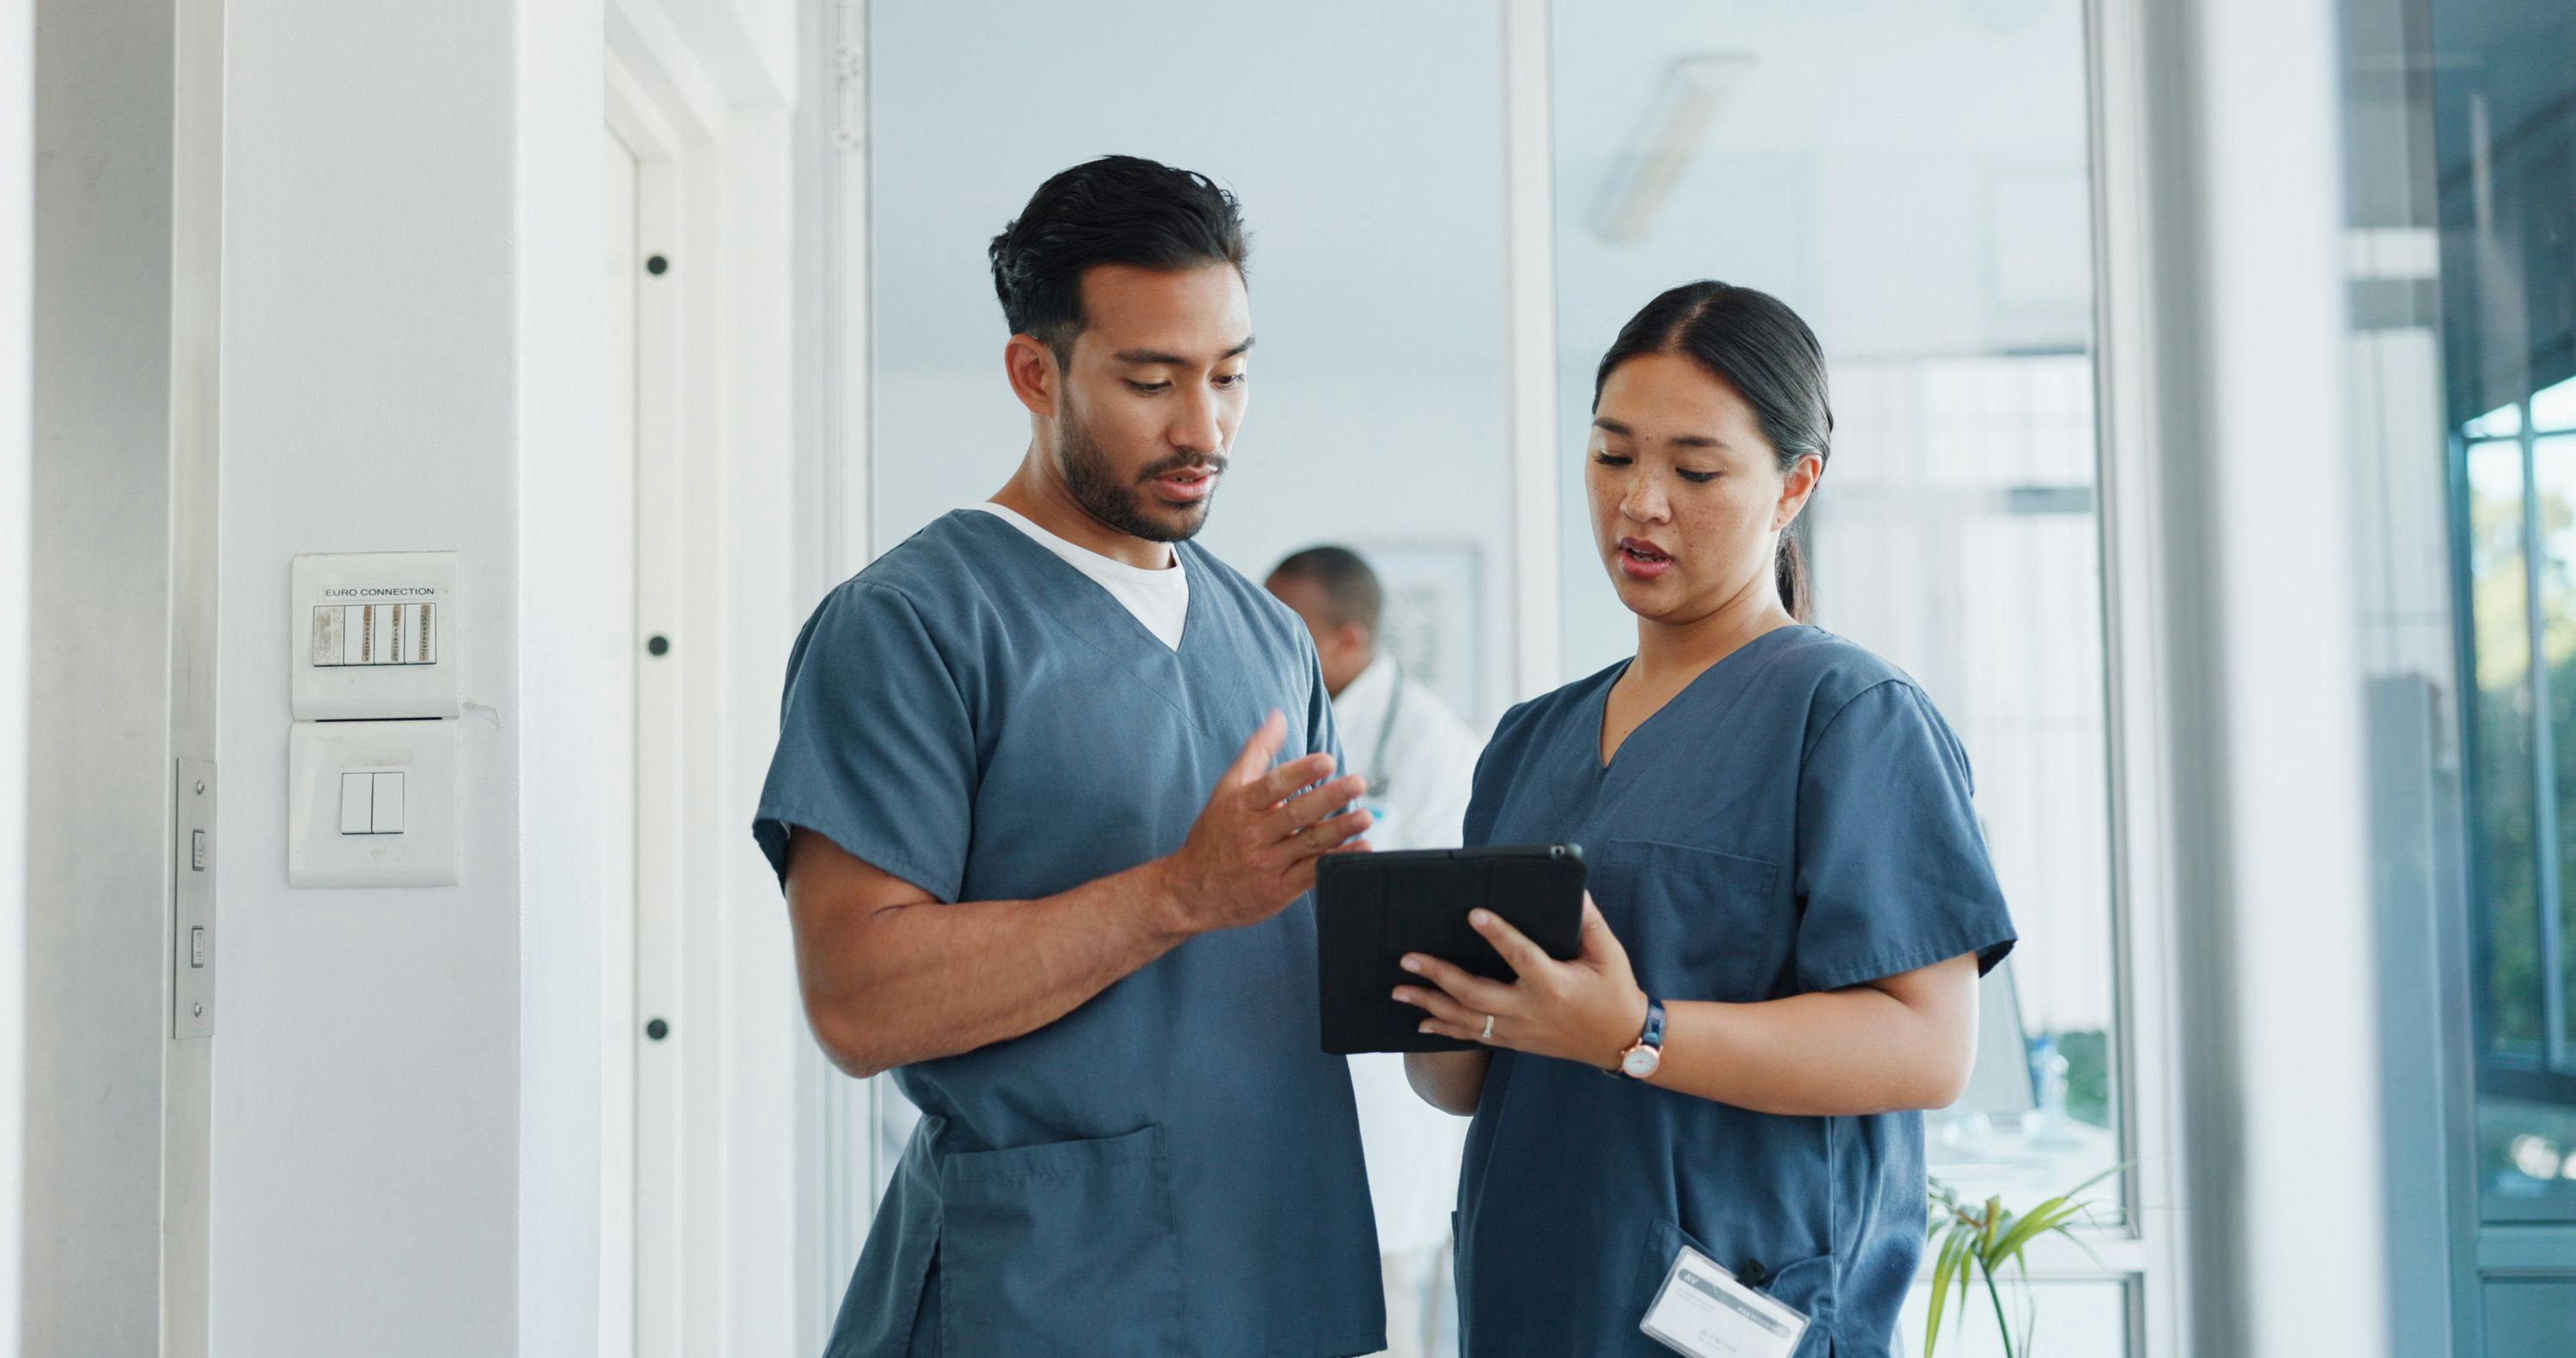 Two physician assistants gather around a tablet